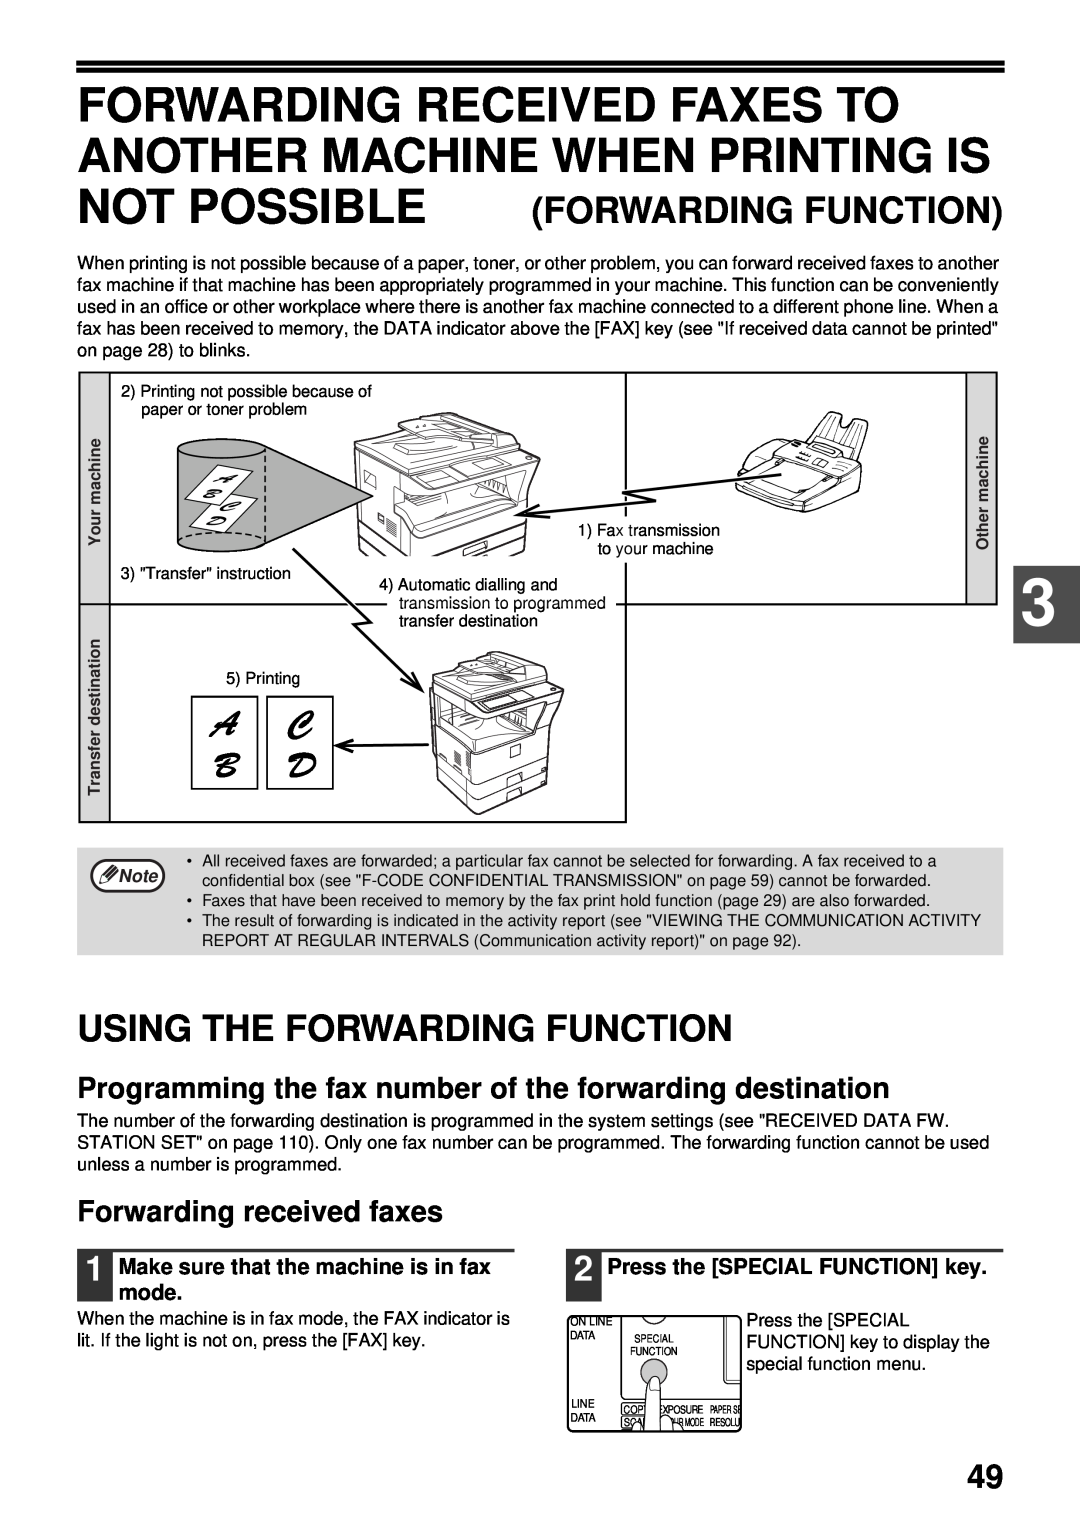 Sharp MX-FX13 appendix Using The Forwarding Function, Programming the fax number of the forwarding destination 